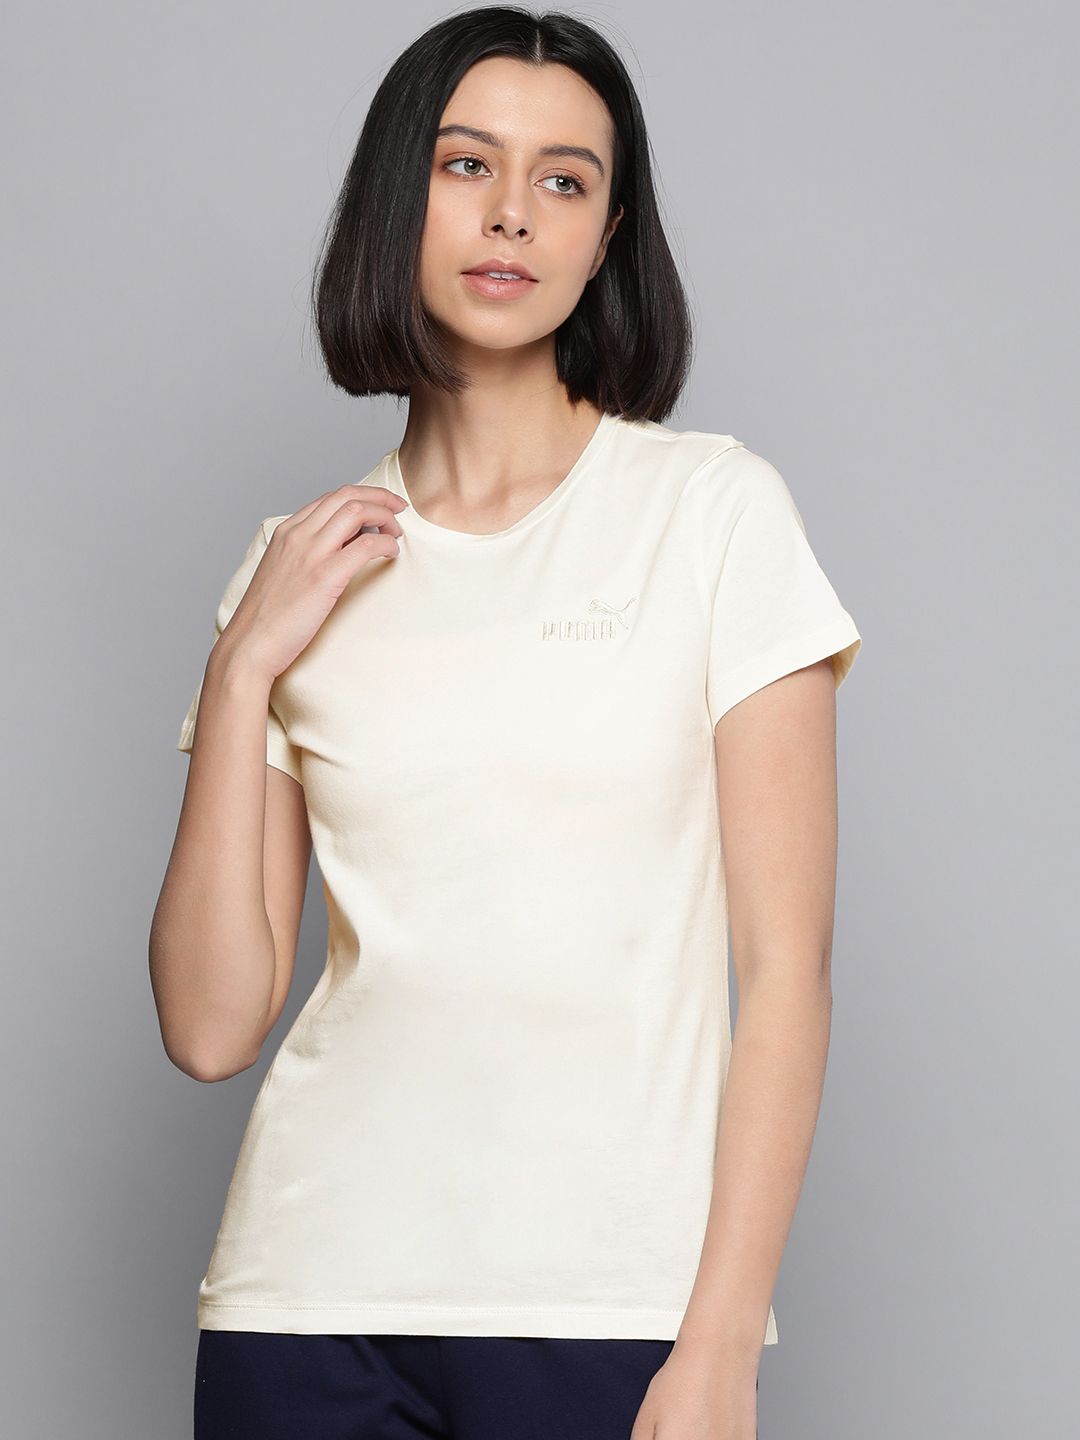 Puma Women Off White Embroidered Pure Cotton T-shirt Price in India